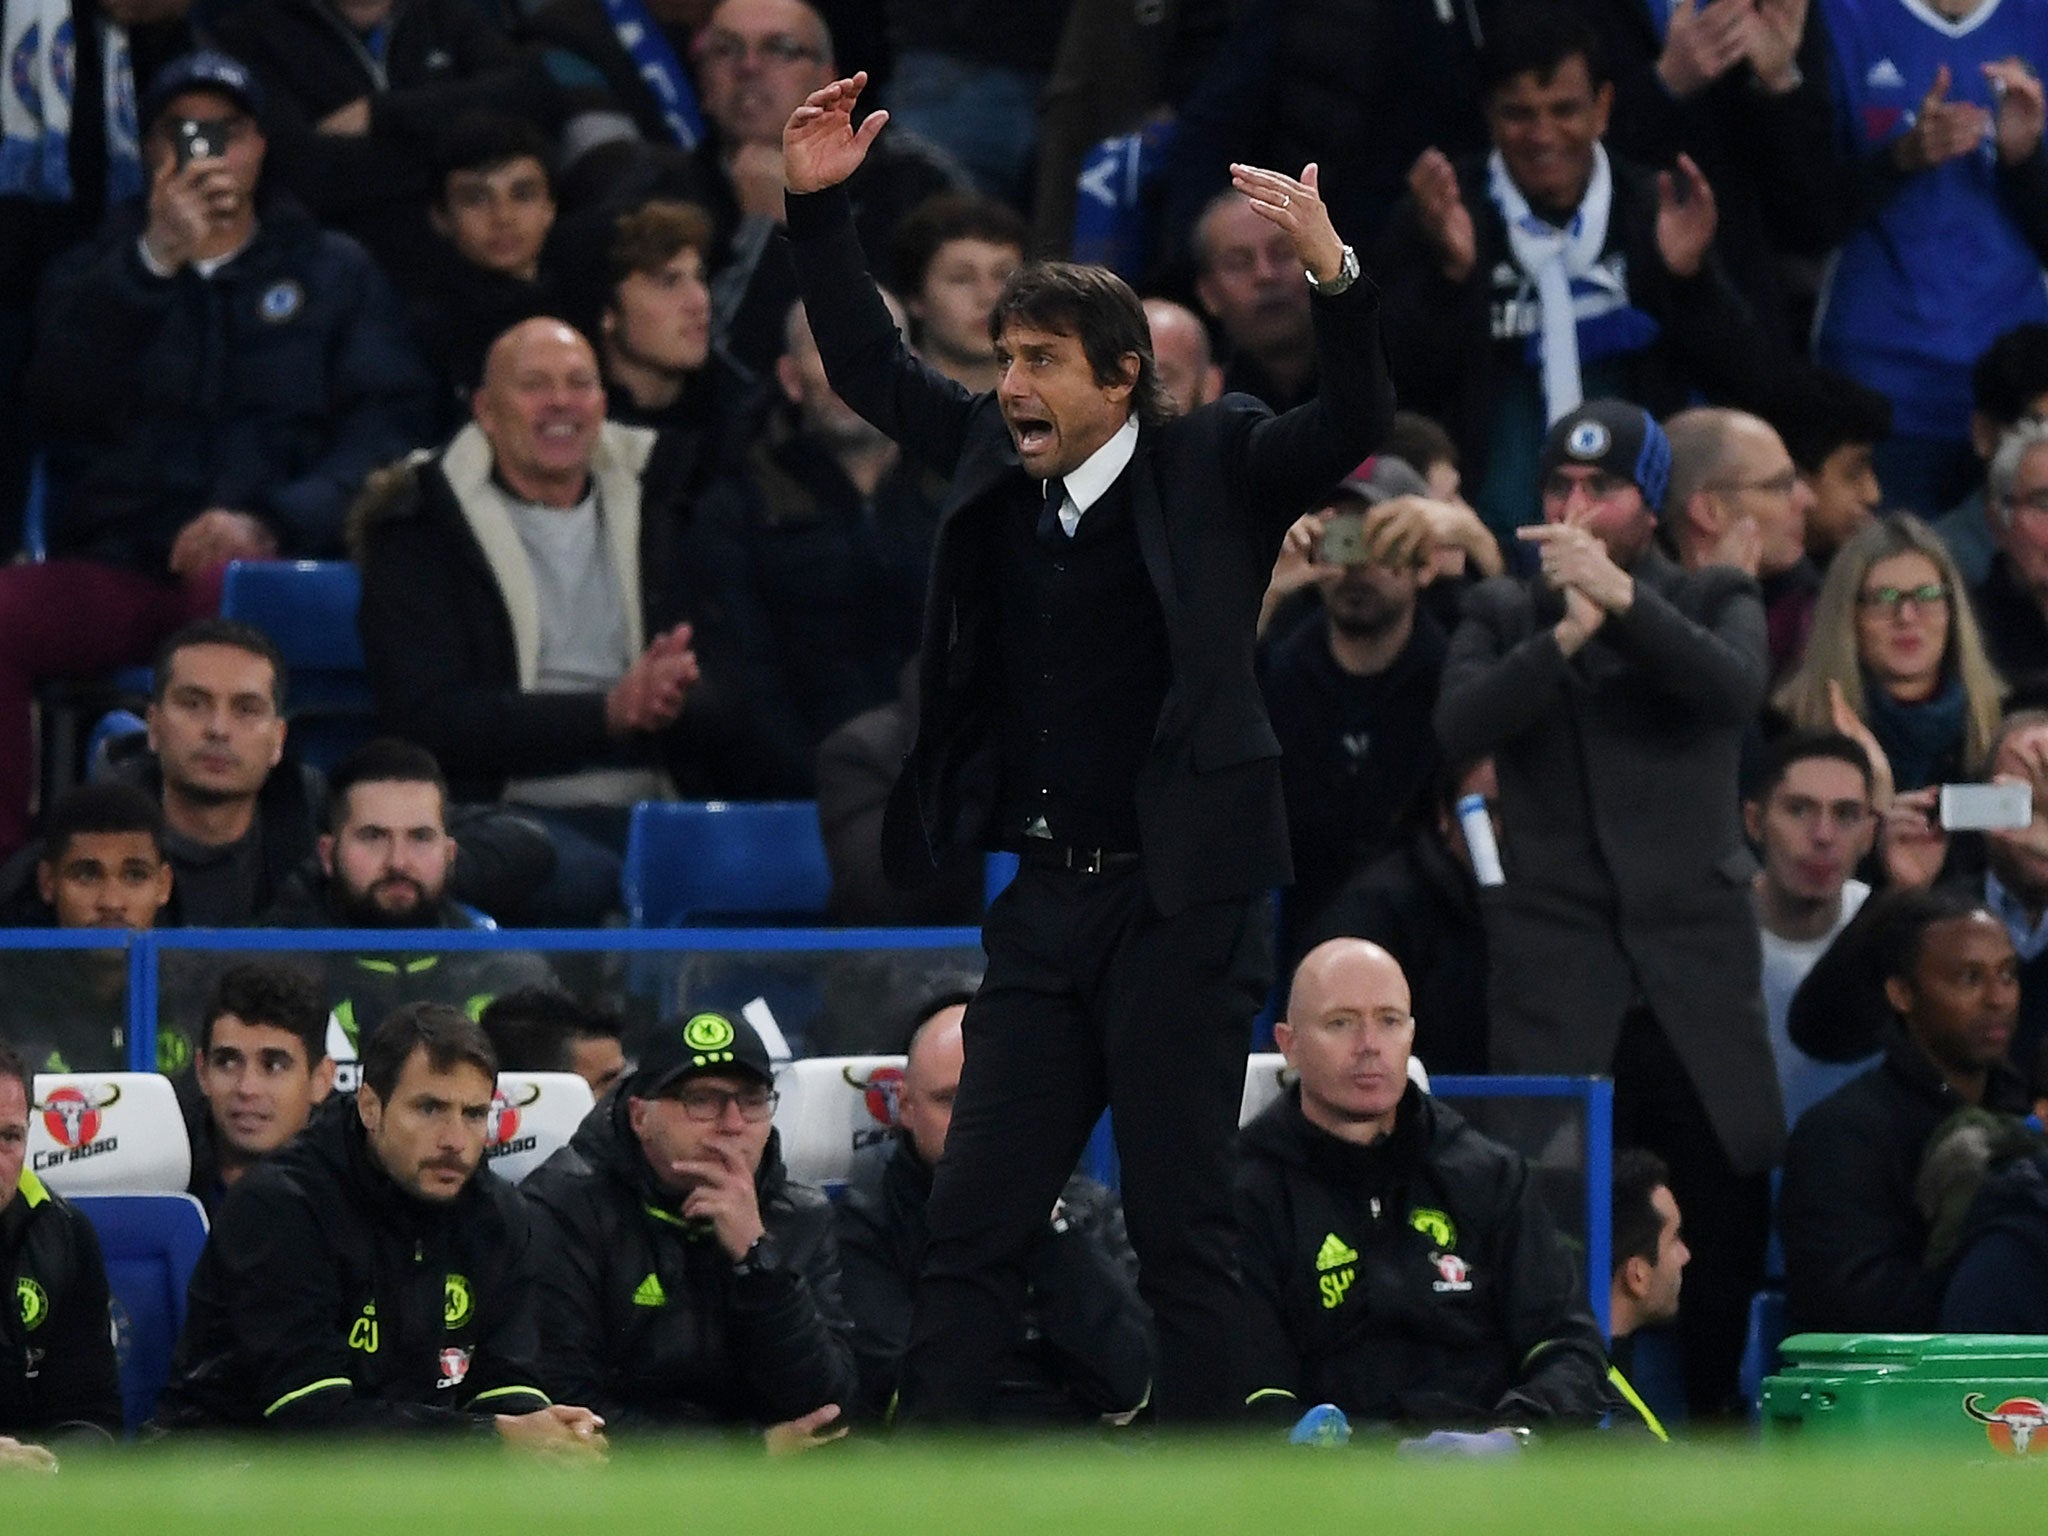 Conte waves his arms and pleads for more noise at Stamford Bridge